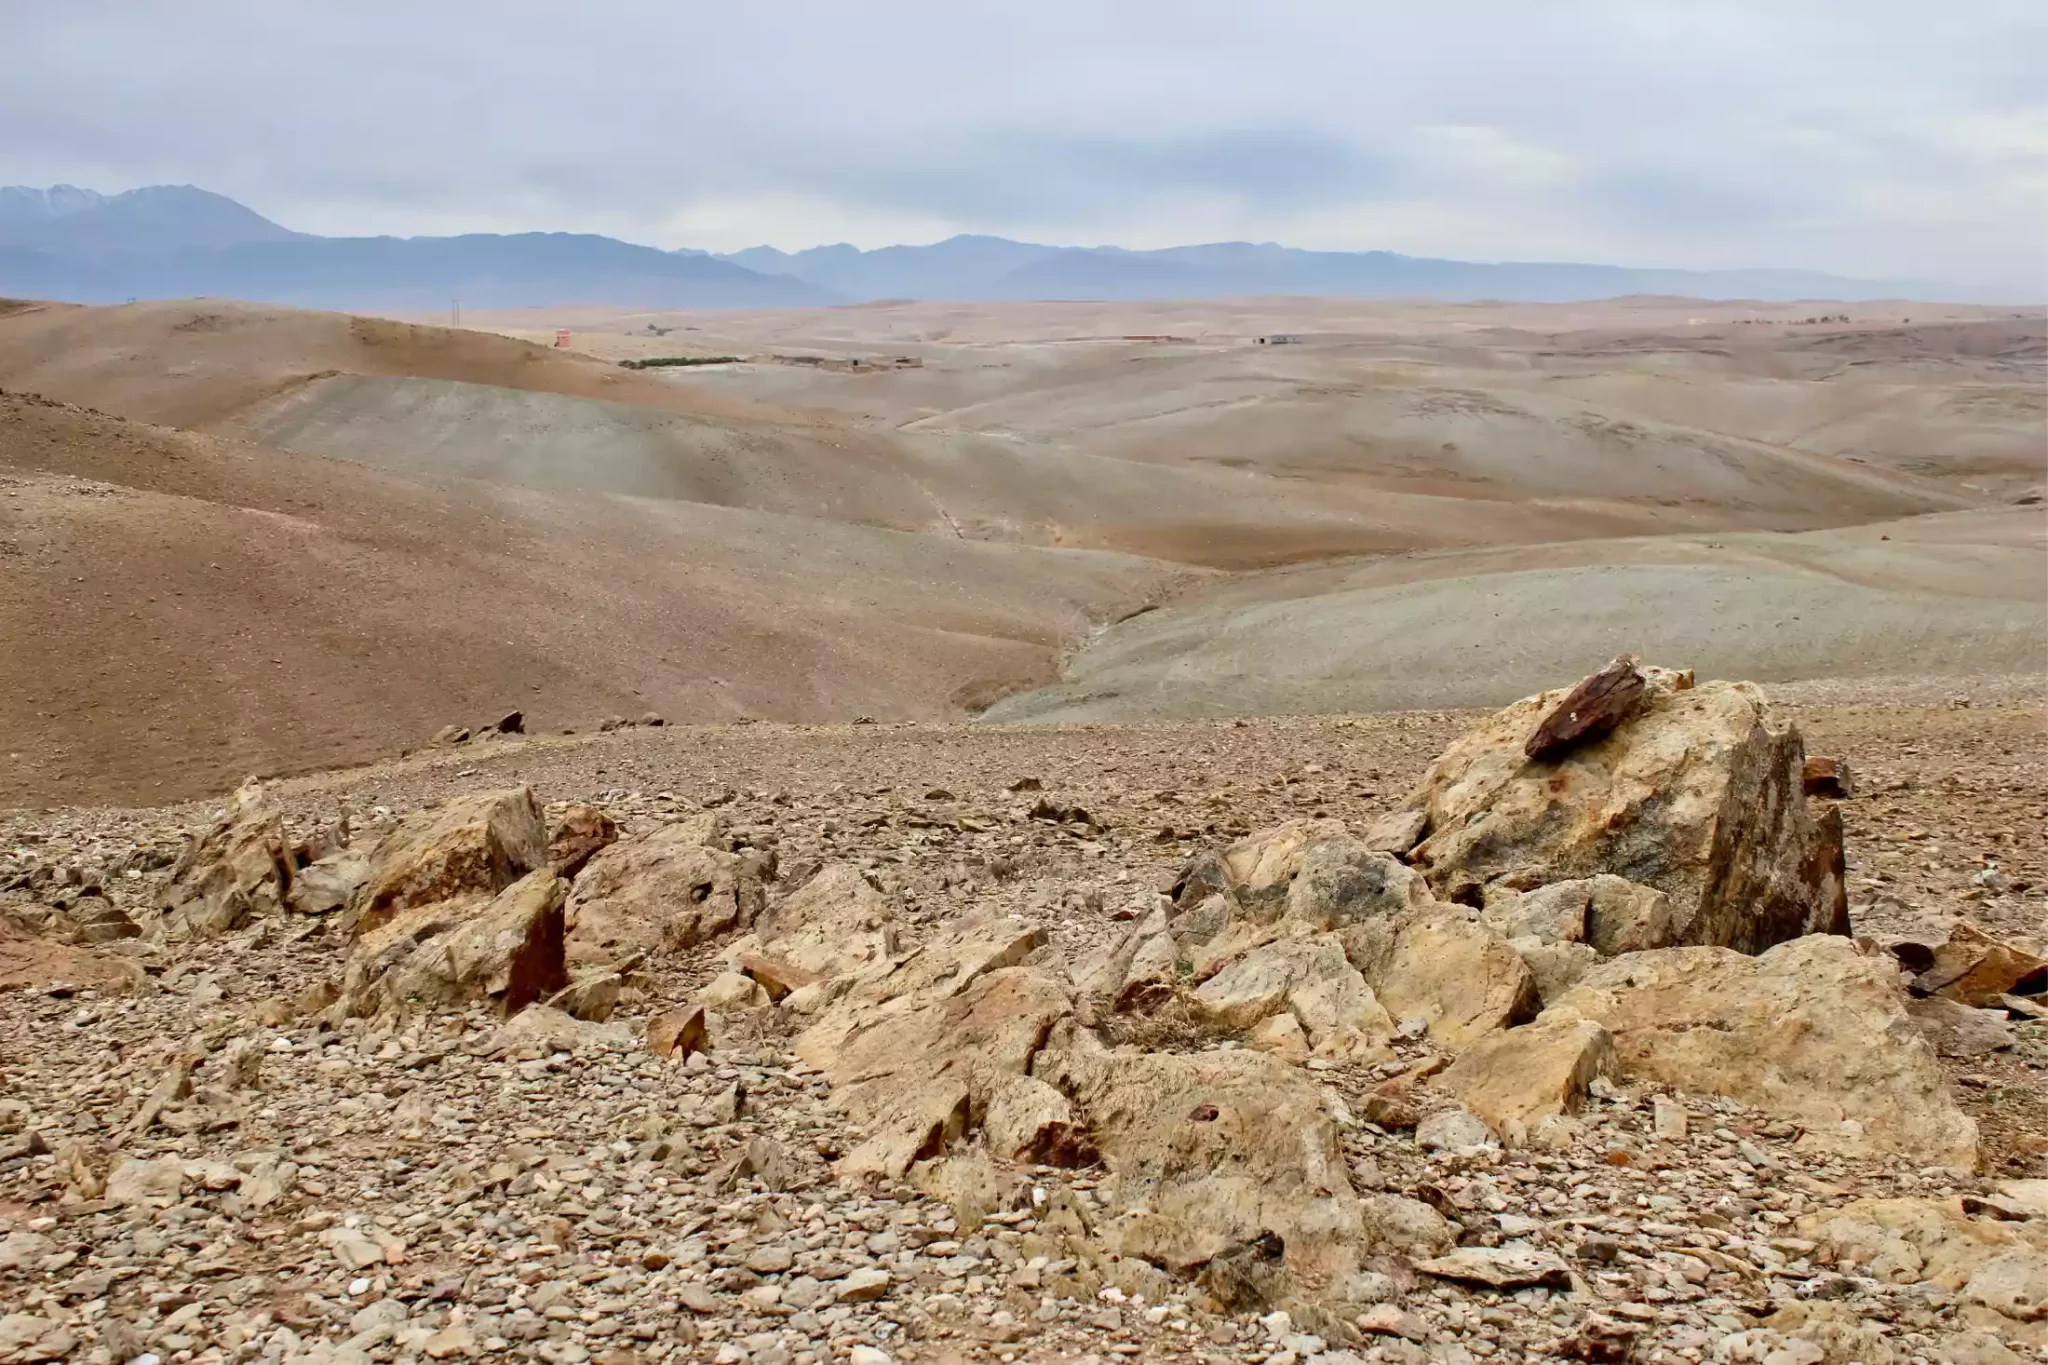 The gravel terrain of Agafay desert with the Atlas mountains in the distance.